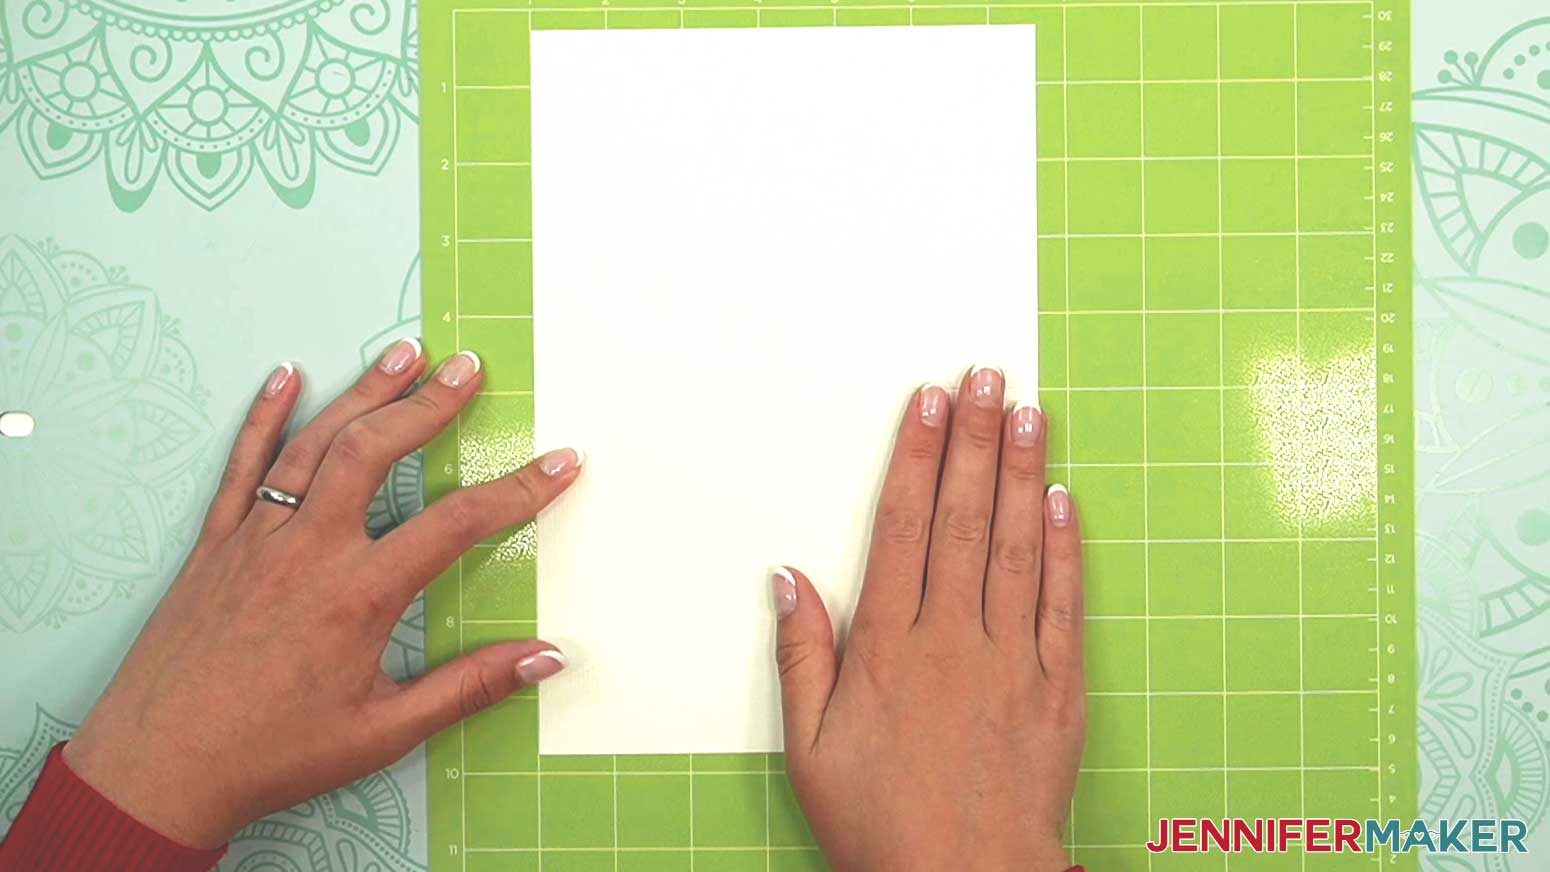 Place the watercolor card so the center crease and the left edge are lined with lines on the machine mat.